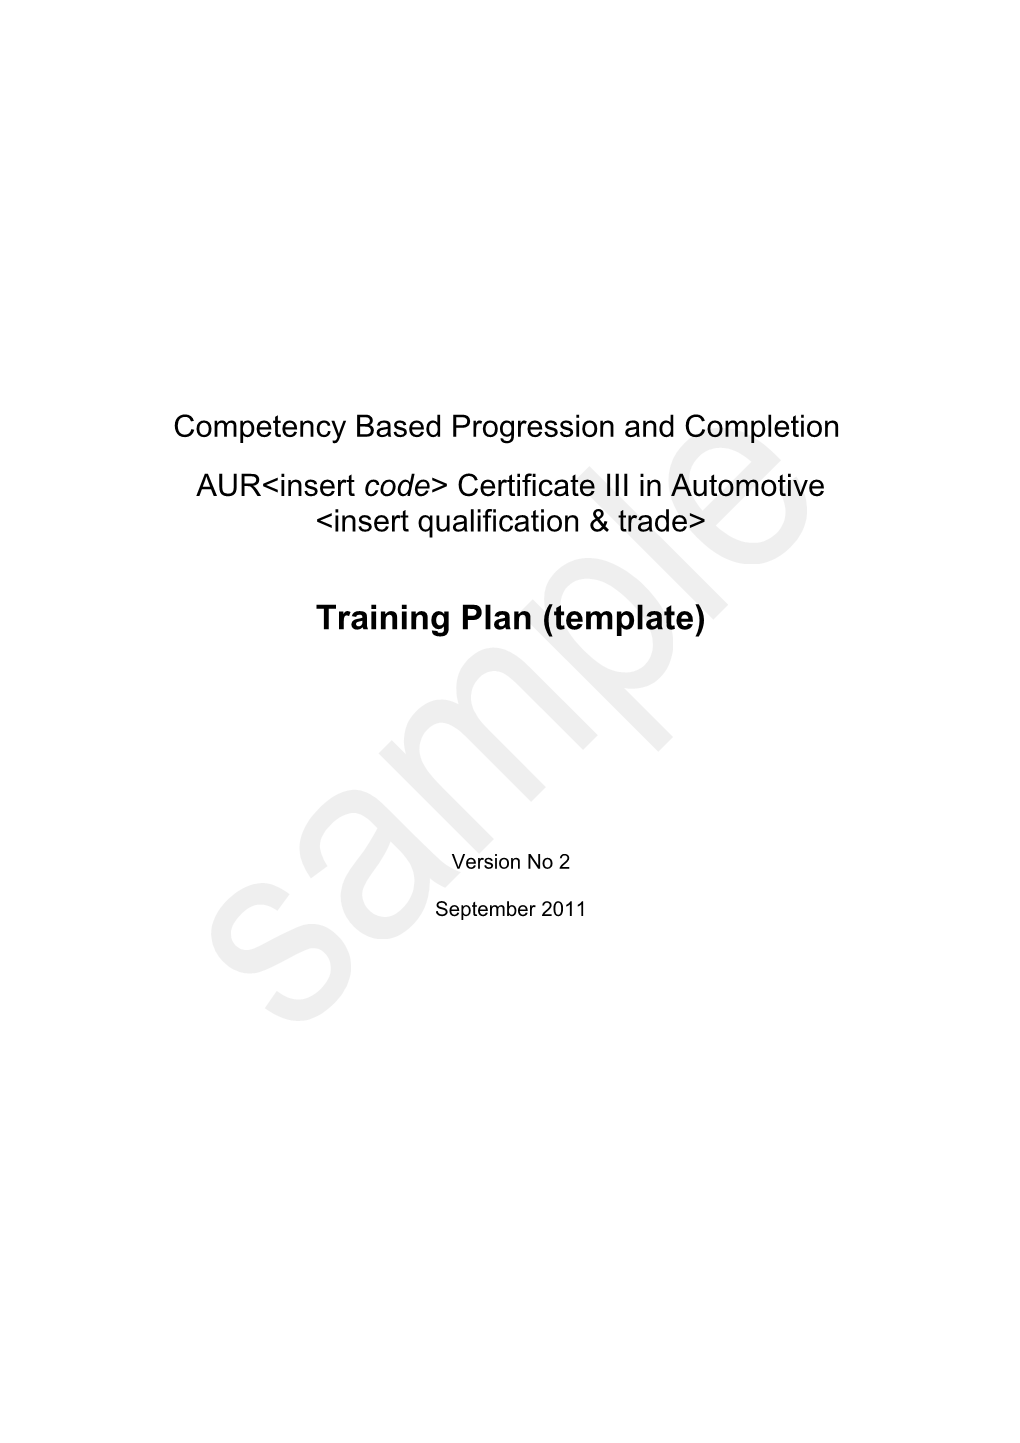 Competency Based Progression and Completion -Training Plan